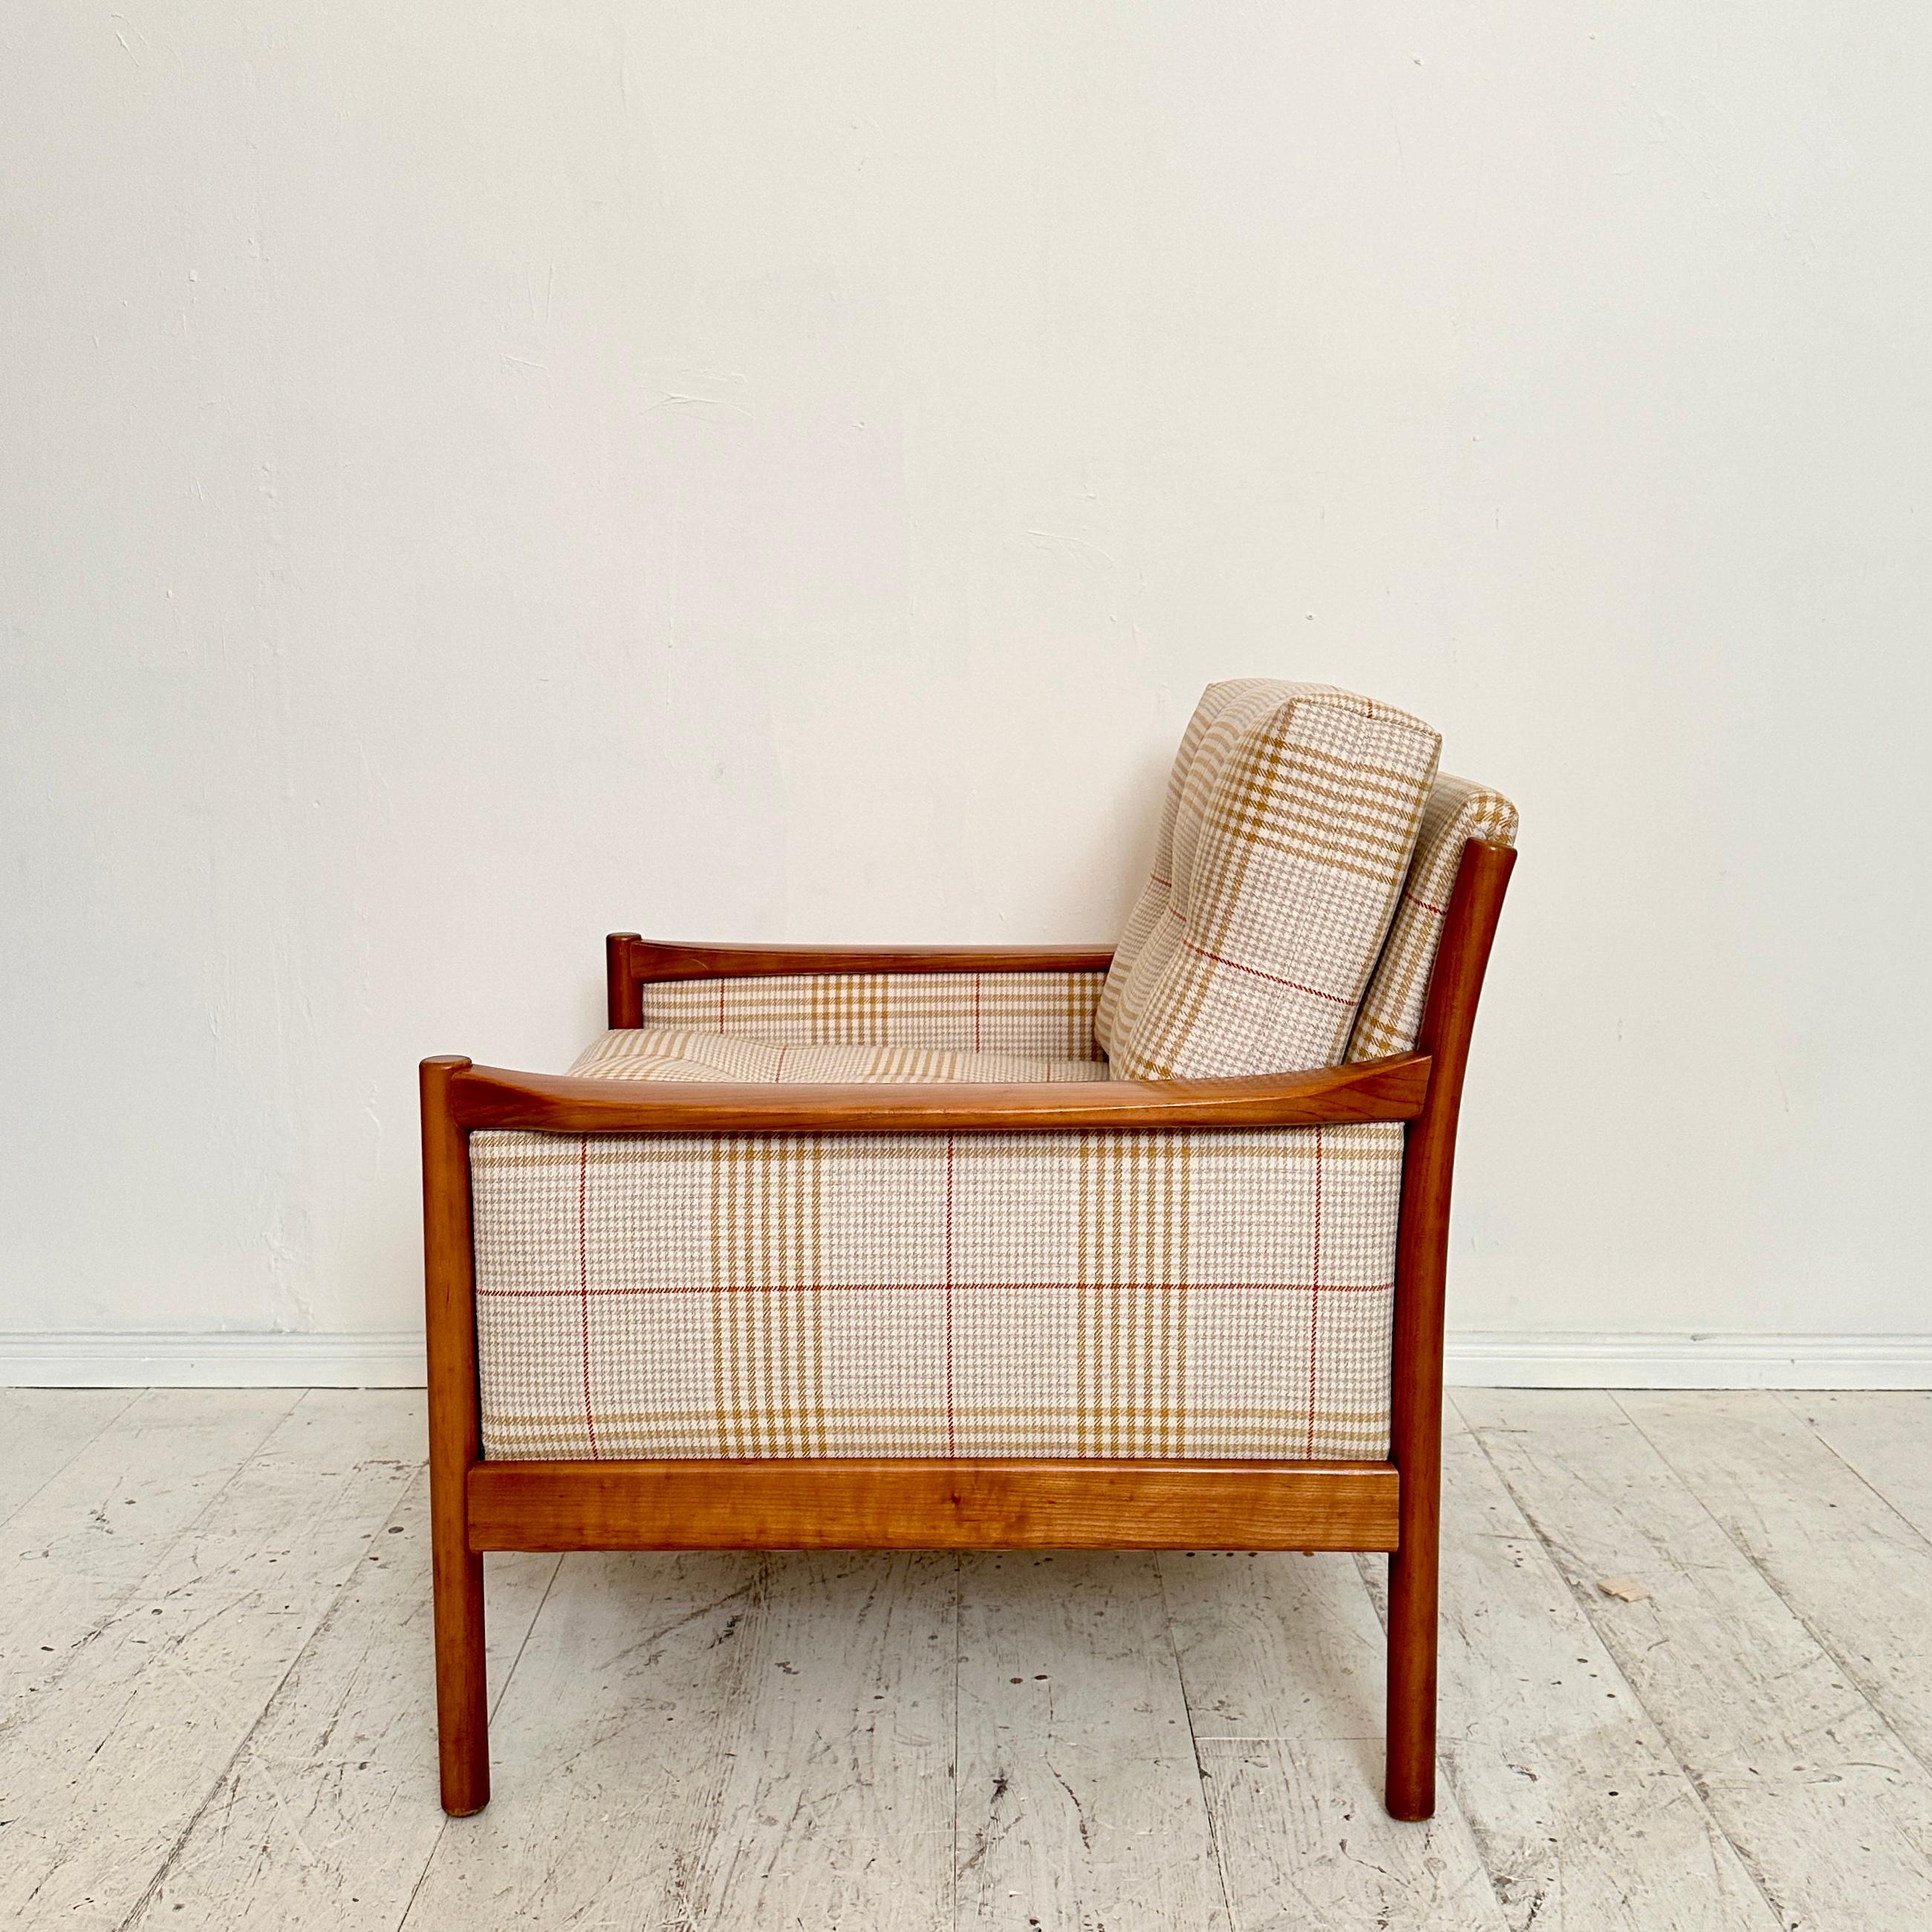 Mid-20th Century Mid Century Scandinavian Armchair in Cherry Wood and Checked Fabric, ca. 1960 For Sale